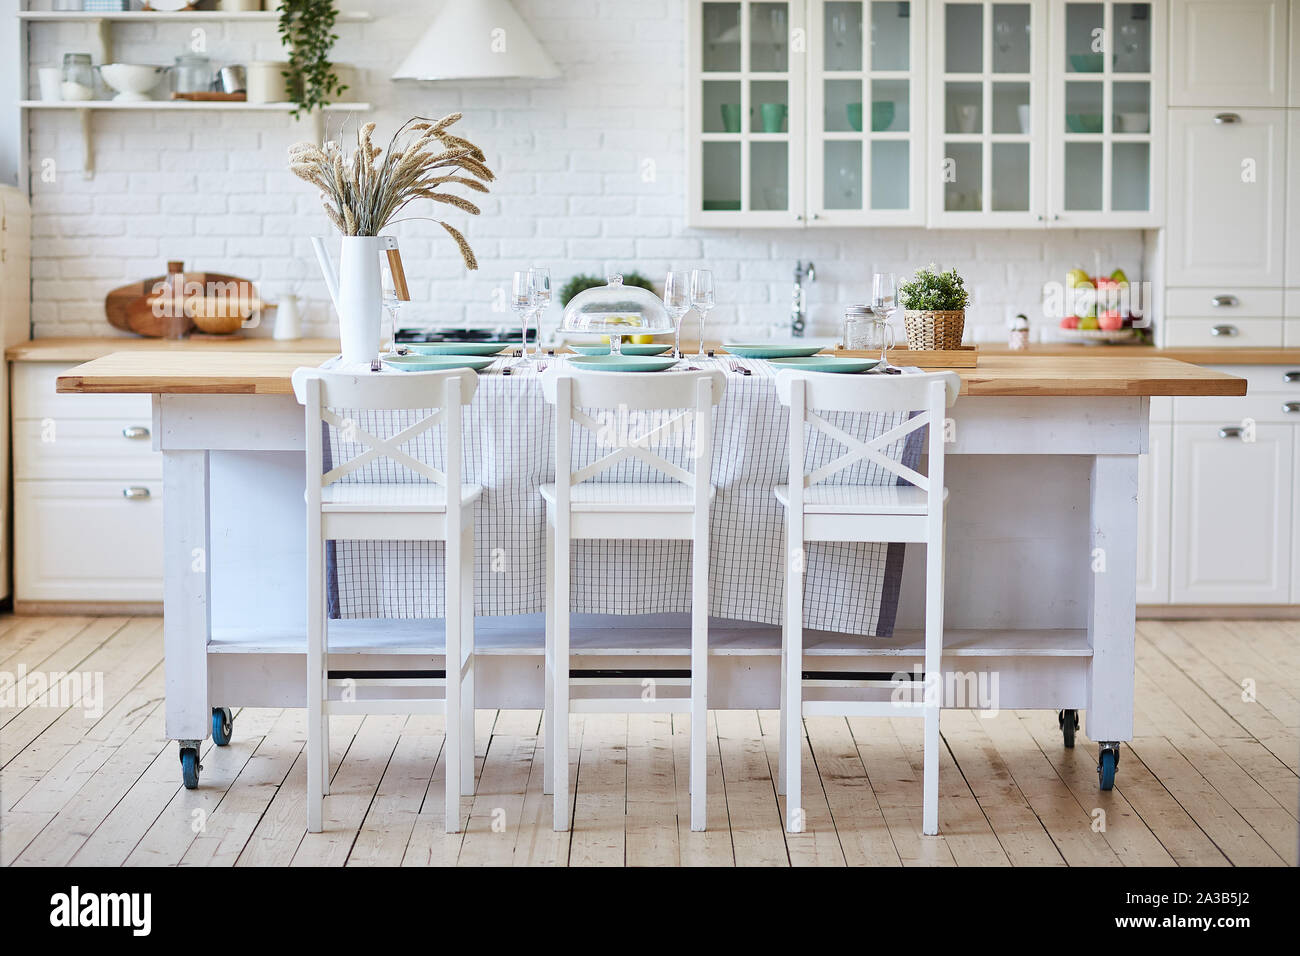 Beautiful White Wooden Kitchen With Island Table And Chairs Stock Photo Alamy